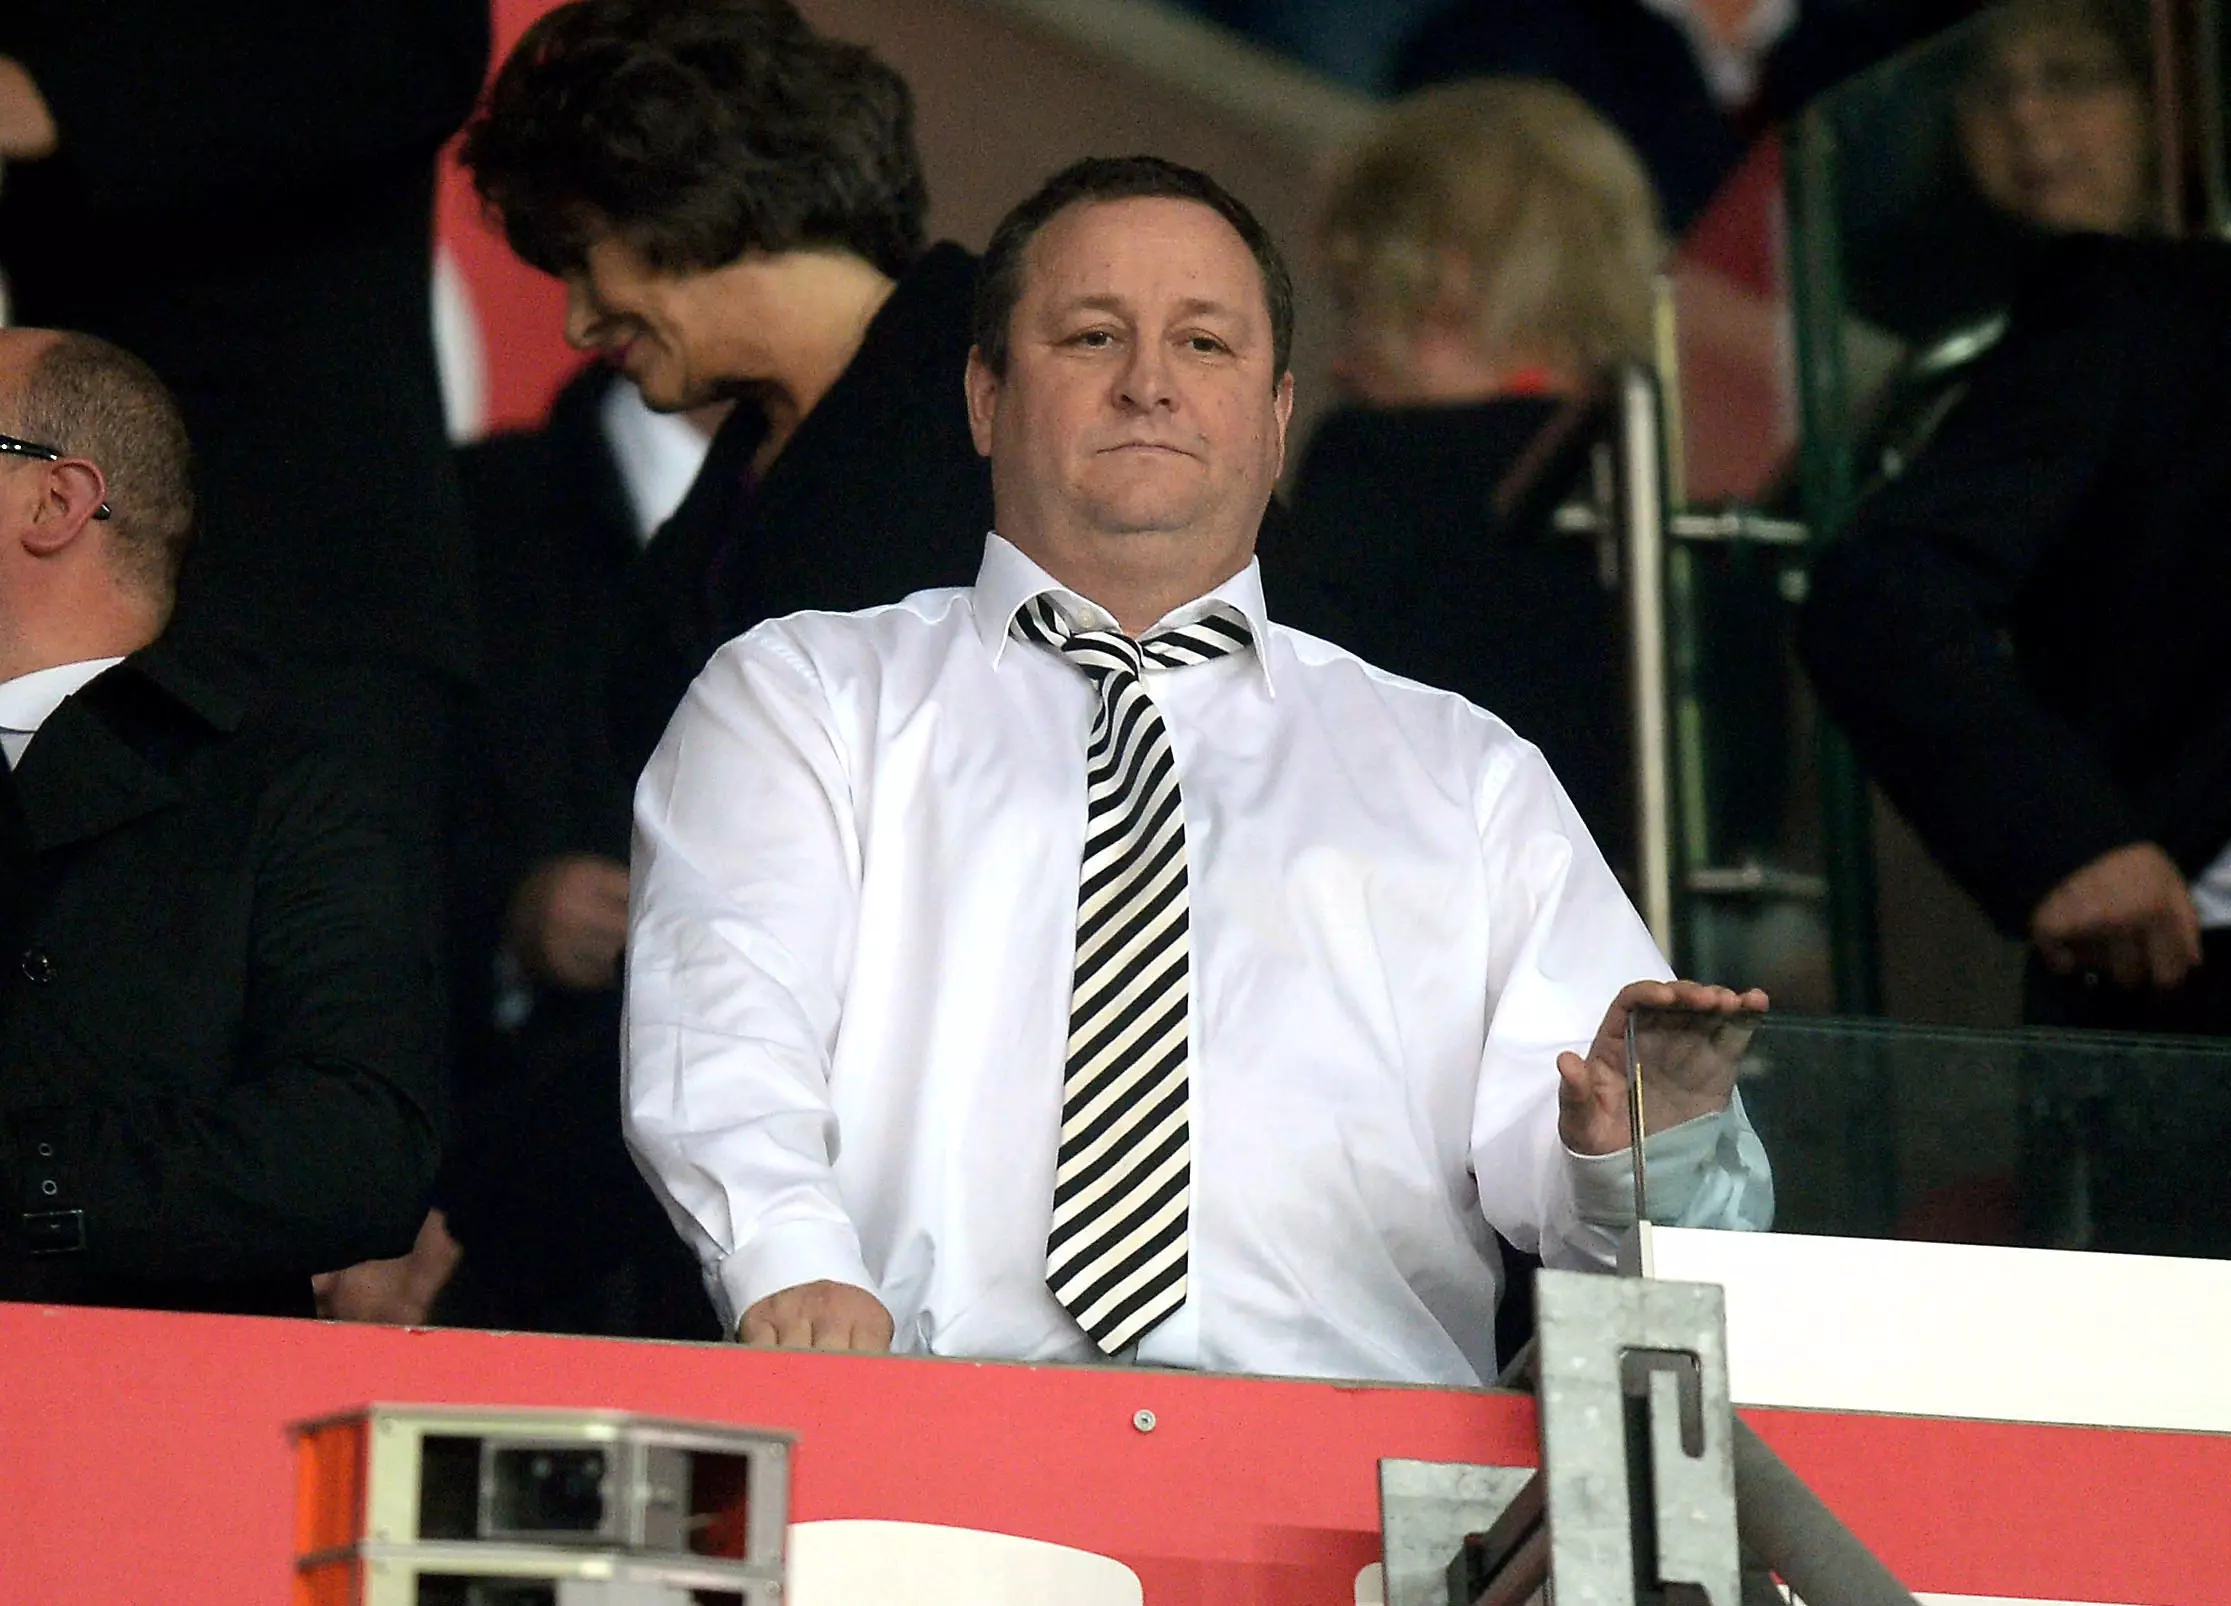 Mike Ashley has not been popular at Newcastle. Image: PA Images